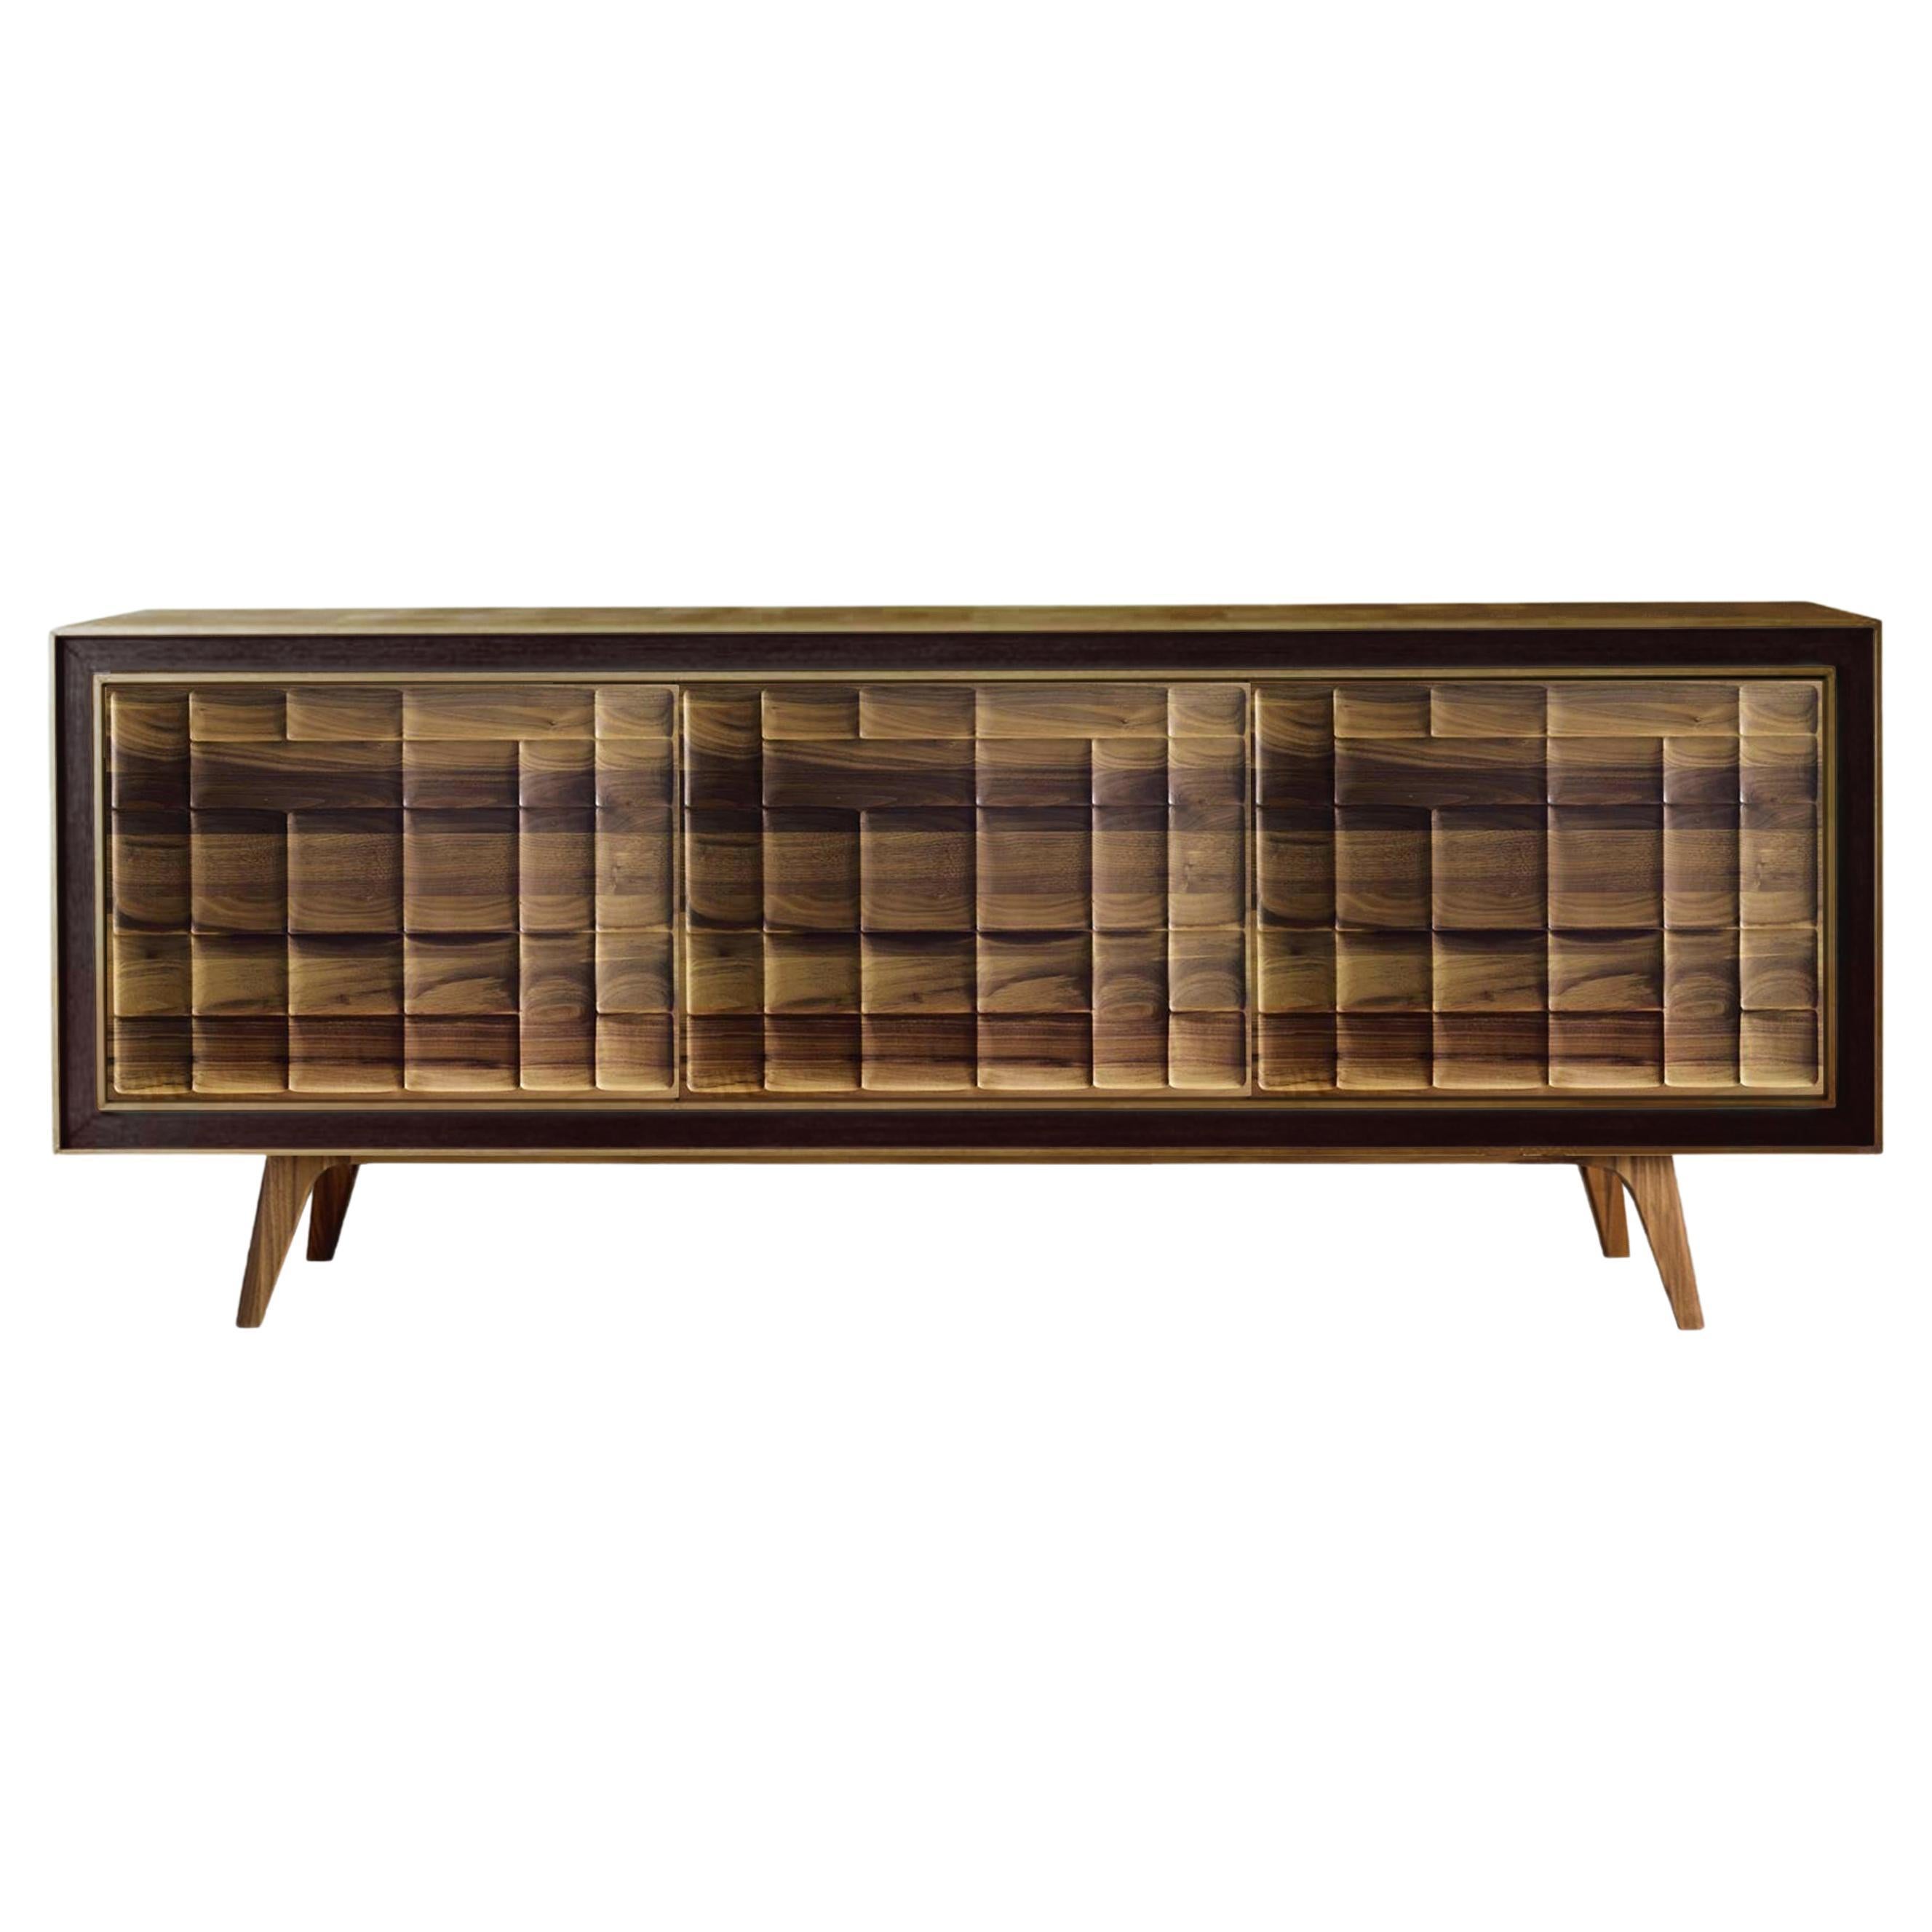 Quadra Scacco Solid Wood Sideboard, Walnut in Natural Finish, Contemporary